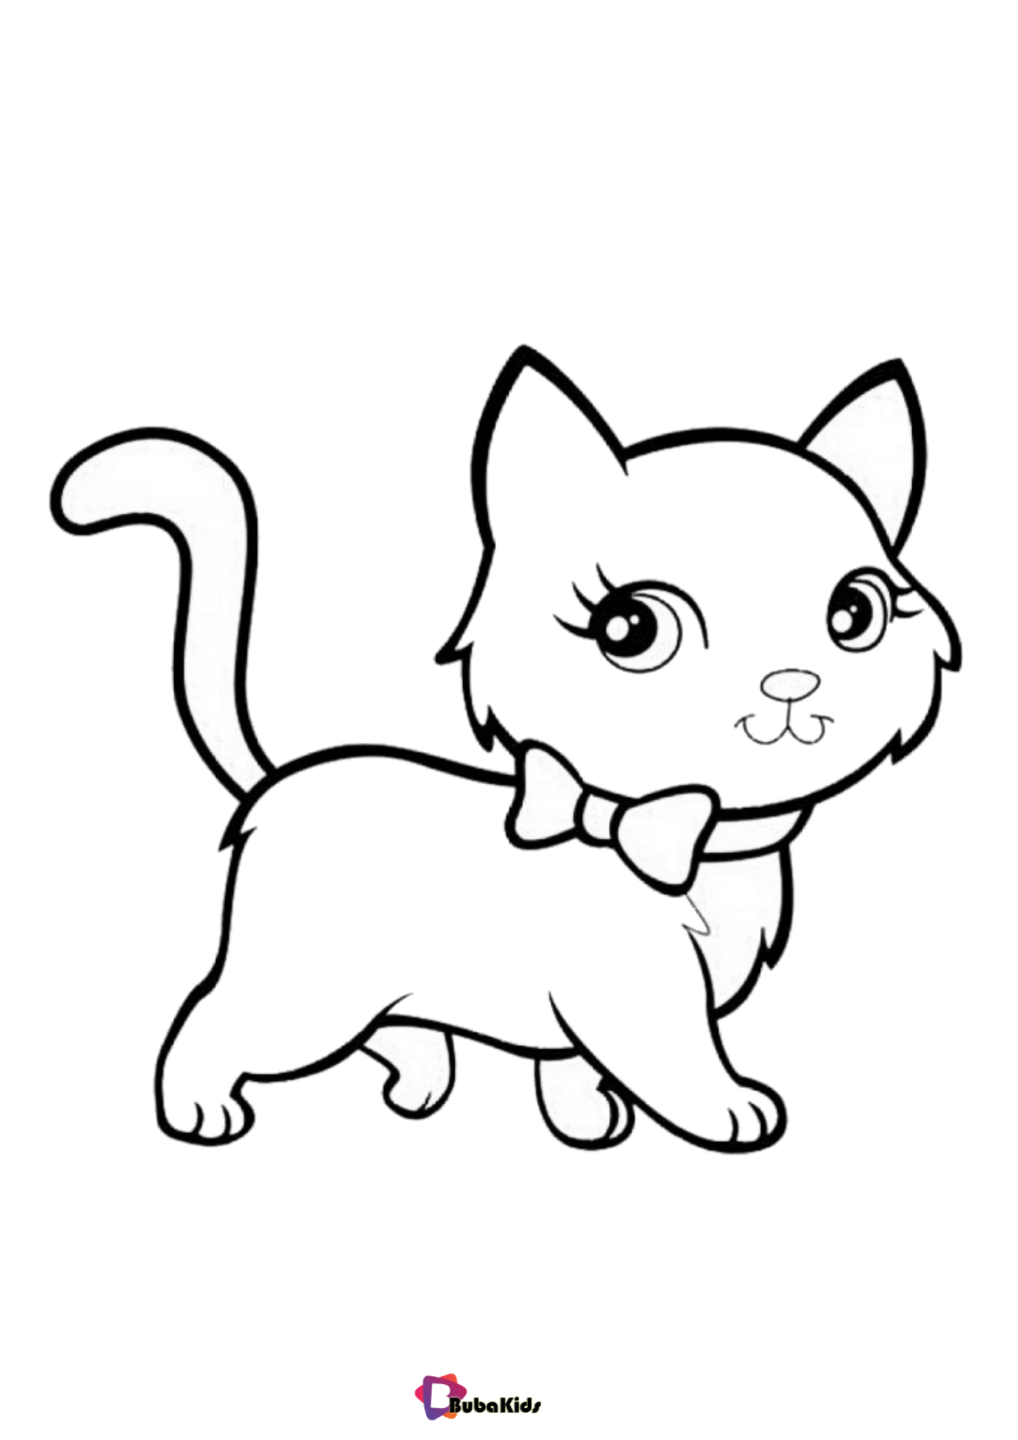 adorable kitten coloring page for children